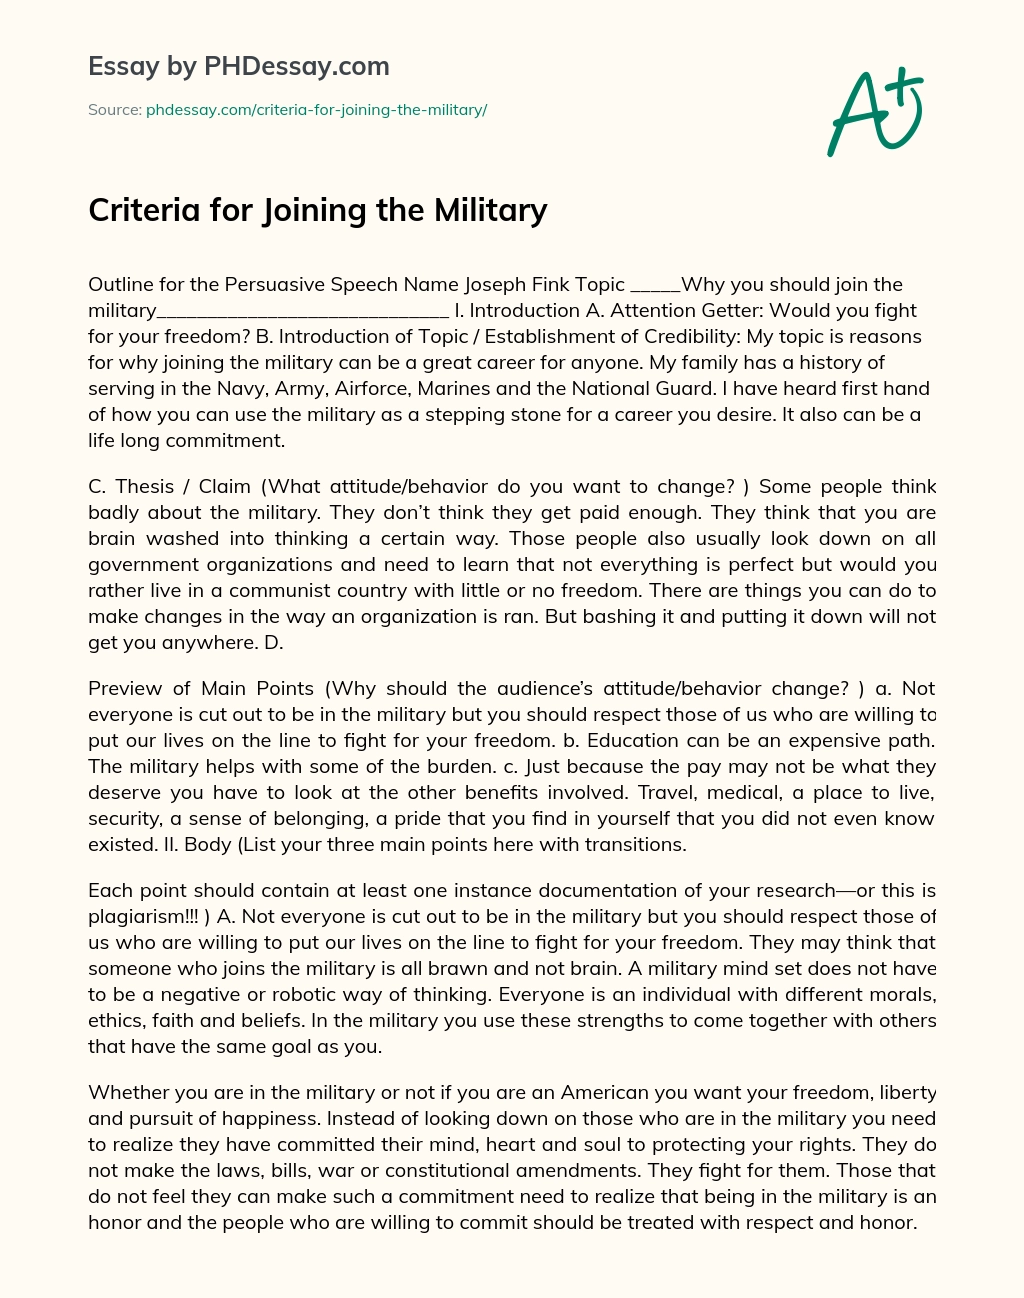 Criteria for Joining the Military essay